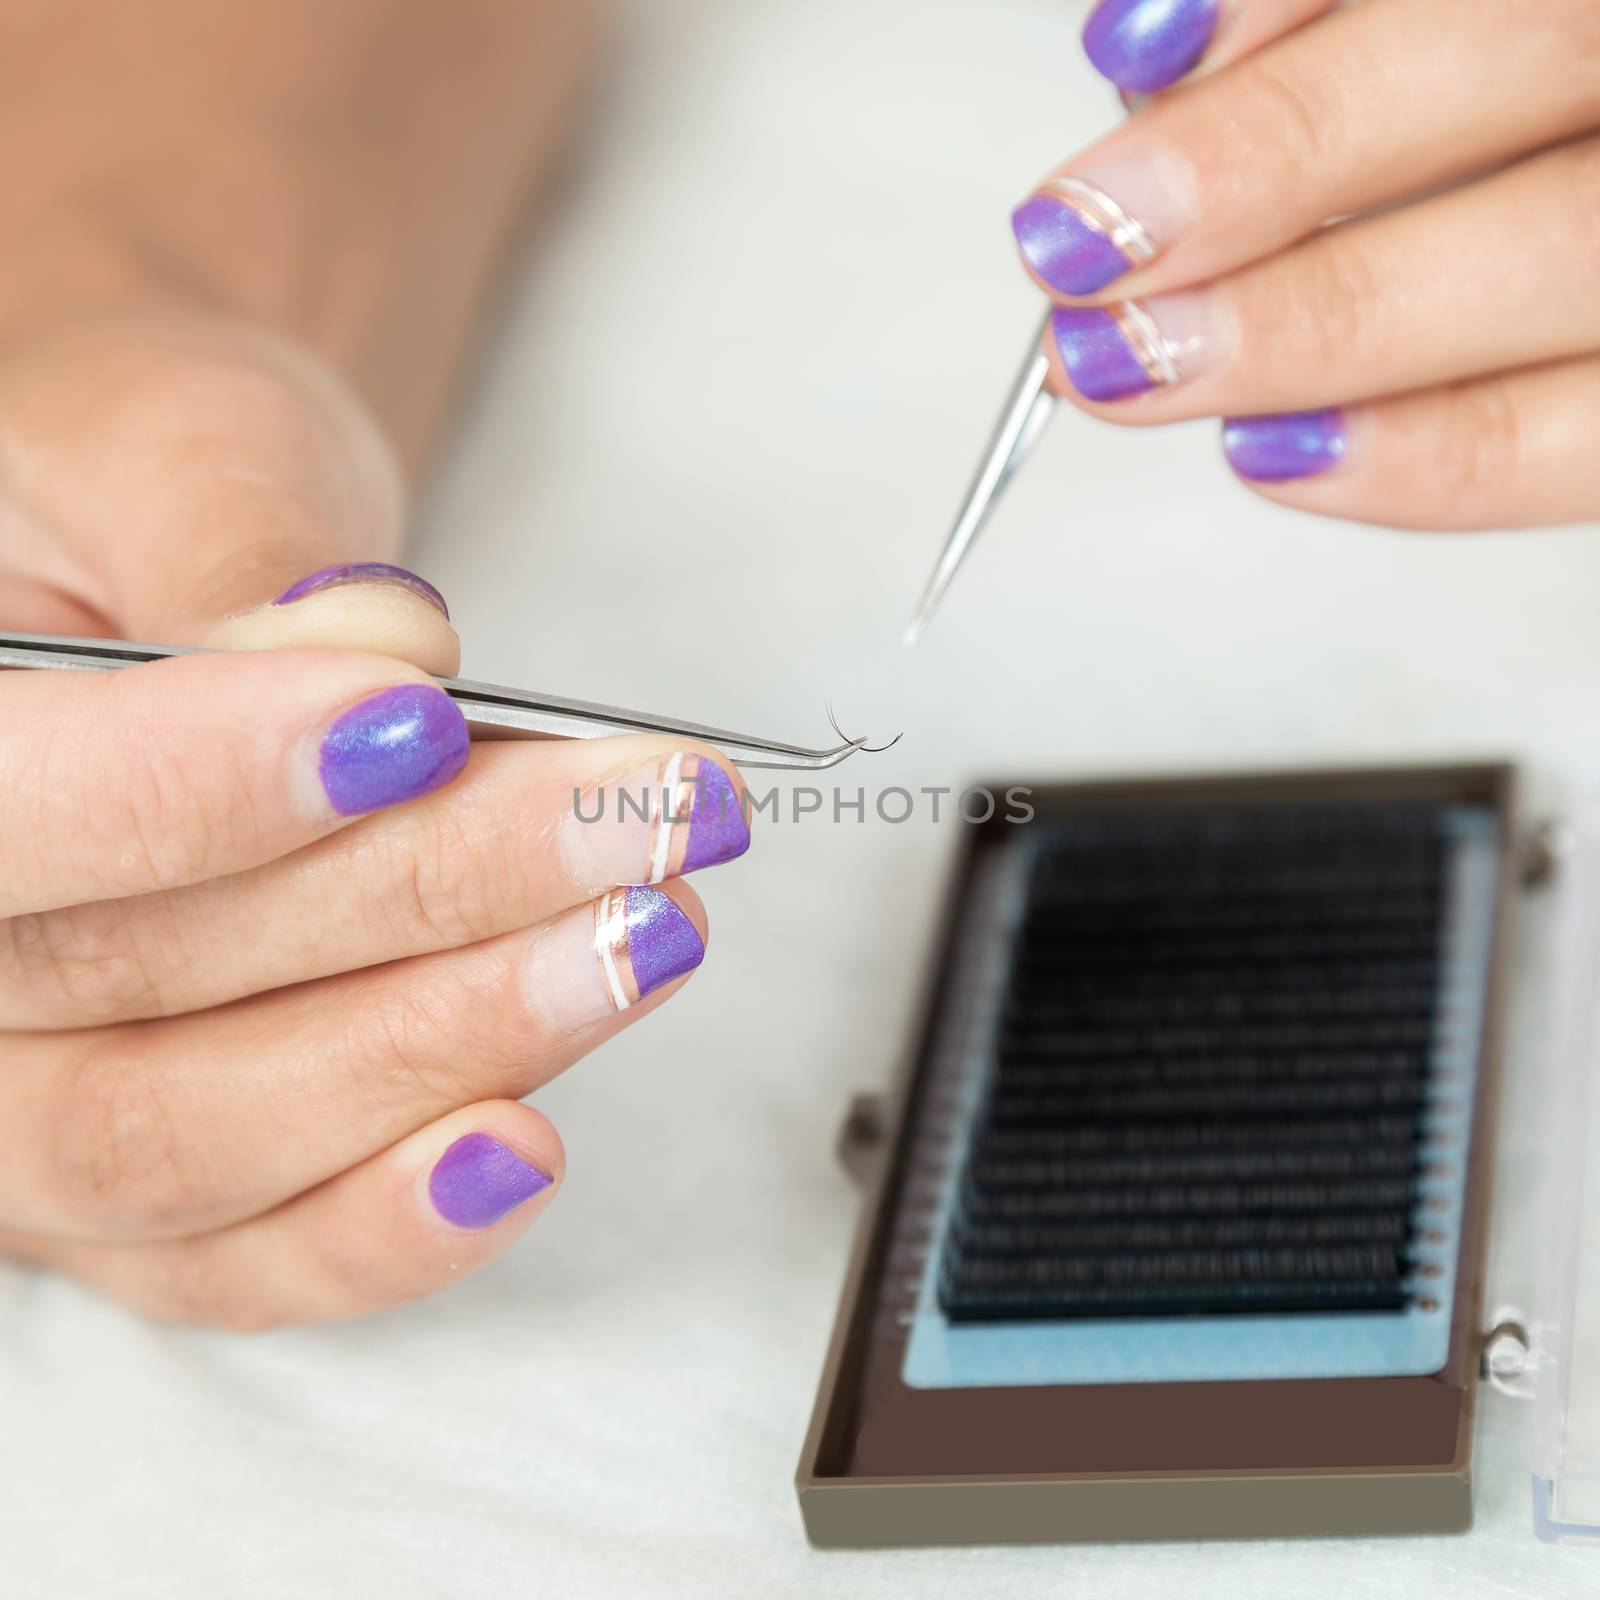 master lash maker is holding one false eyelash by tweezers in hand, close-up